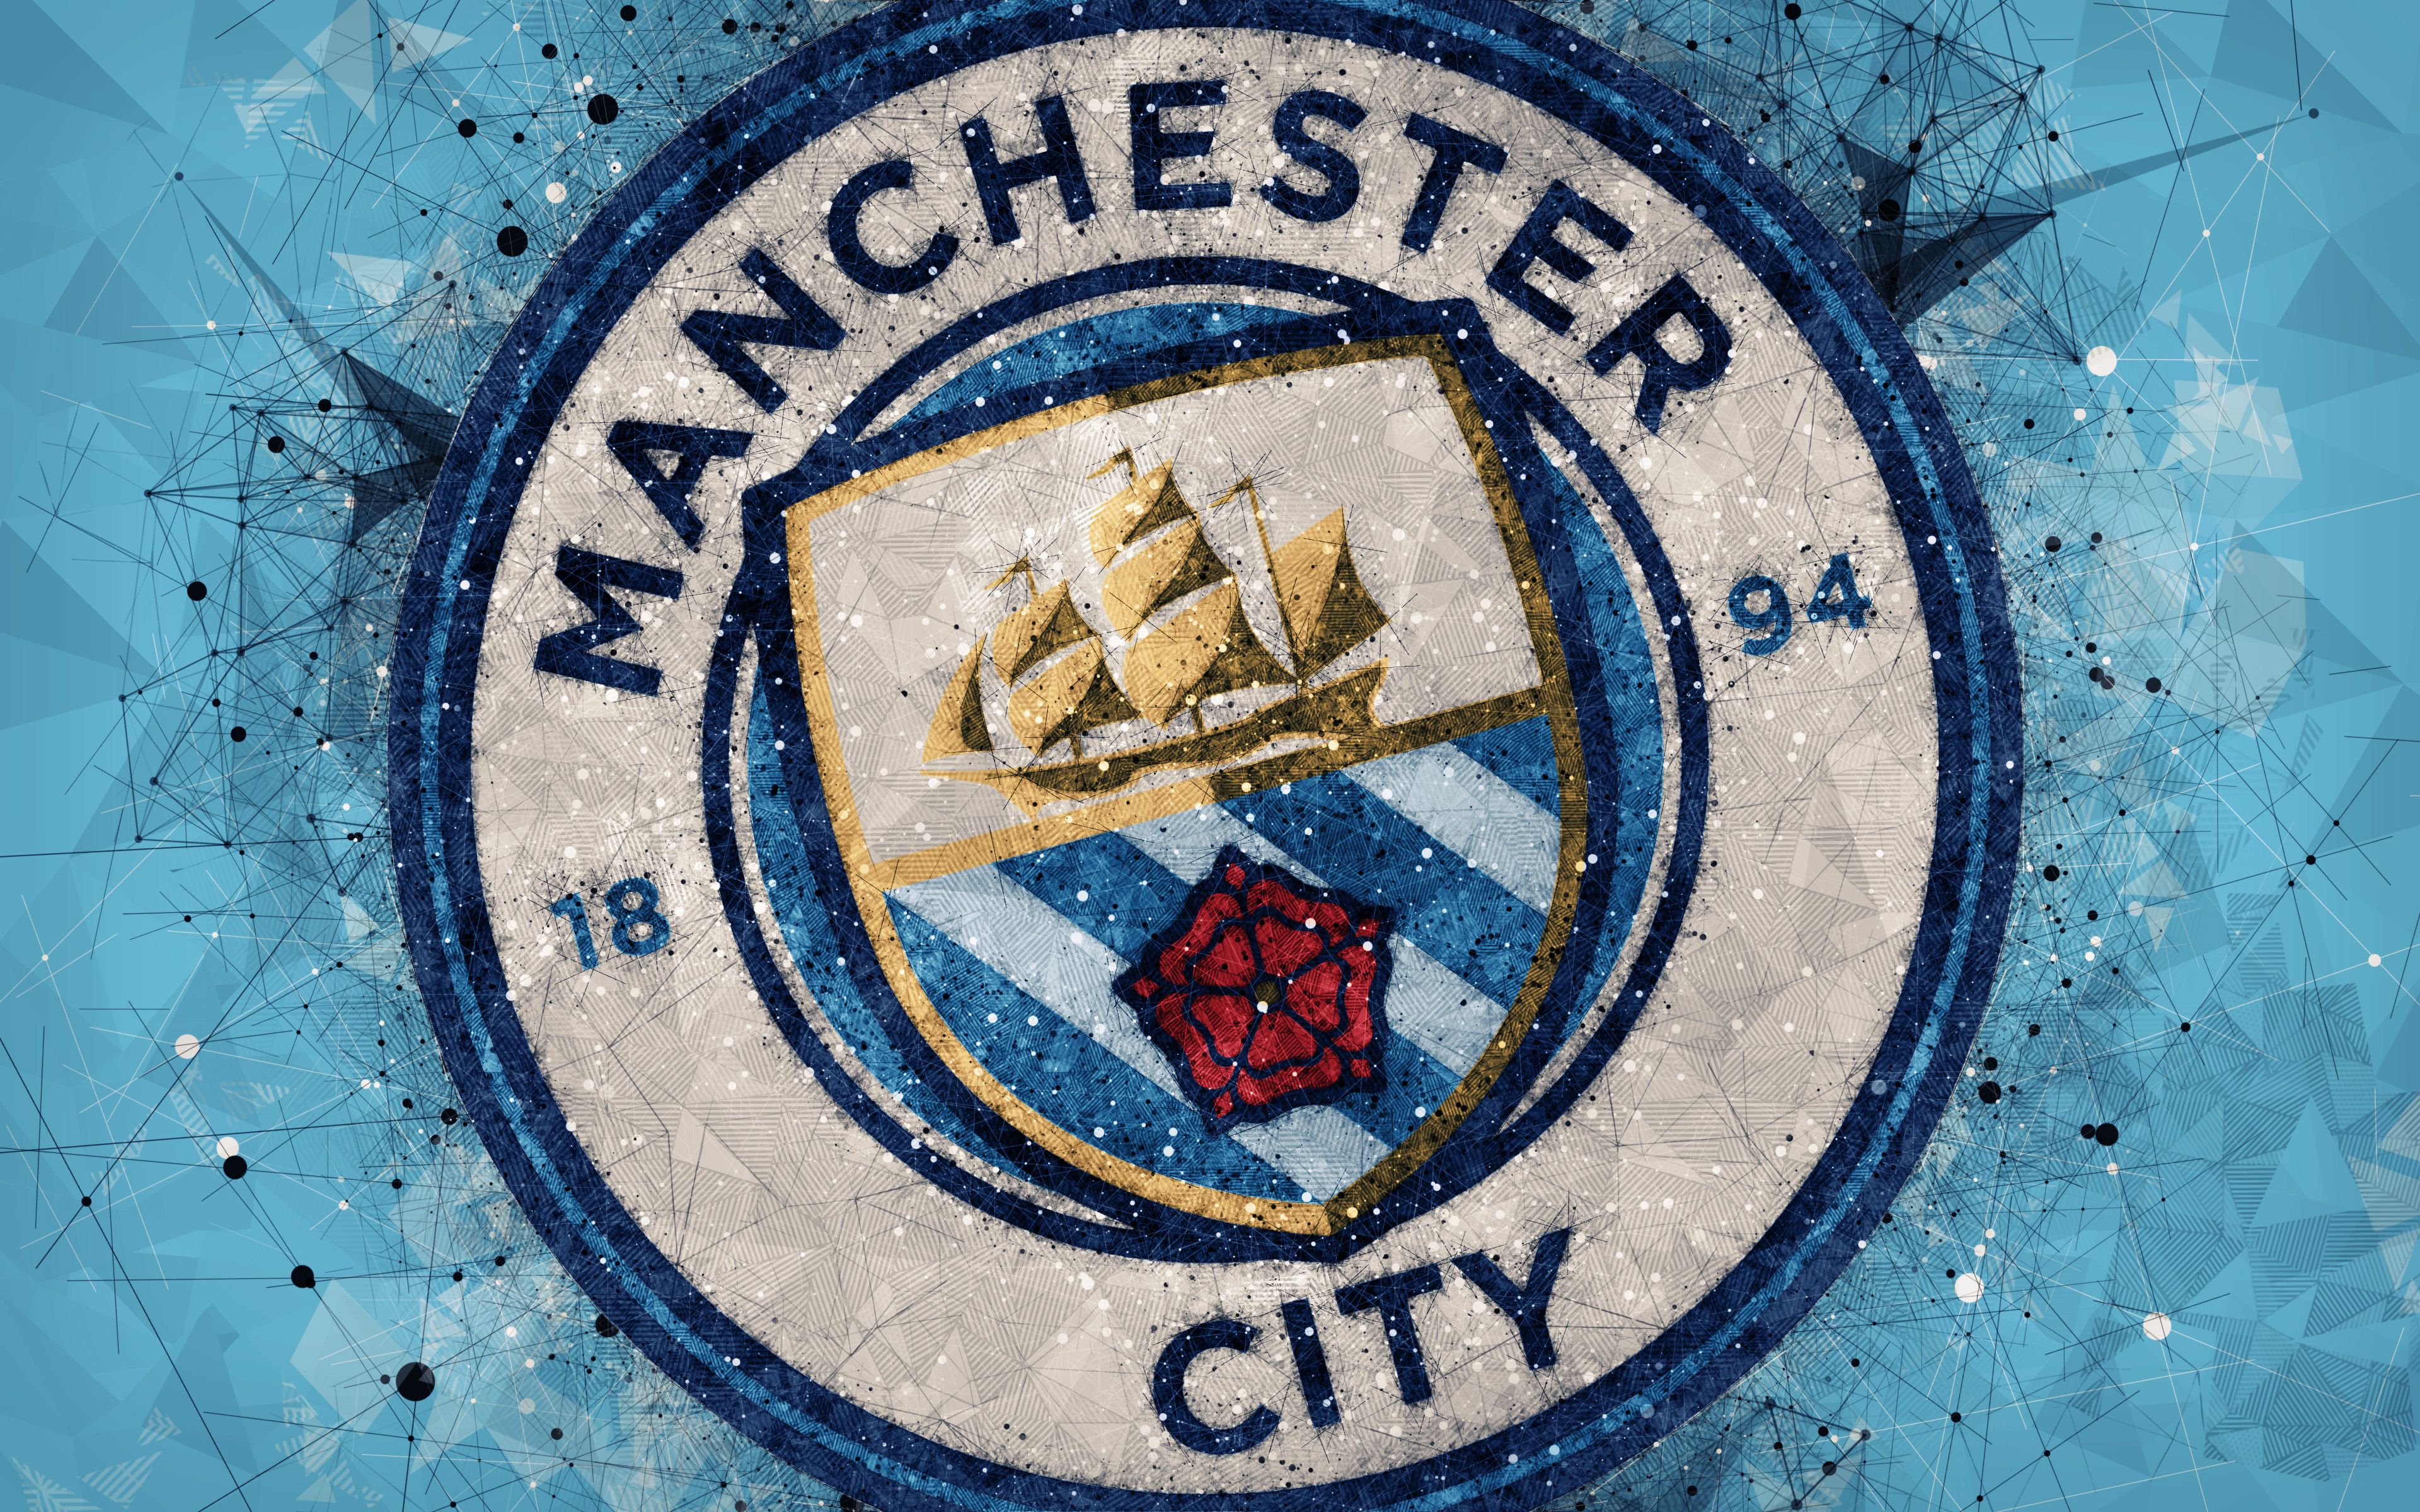 Free download Manchester City Logo 4k Ultra HD Wallpaper Background Image [3840x2400] for your Desktop, Mobile & Tablet. Explore Manchester City Logos Wallpaper. Manchester City Logos Wallpaper, Manchester City